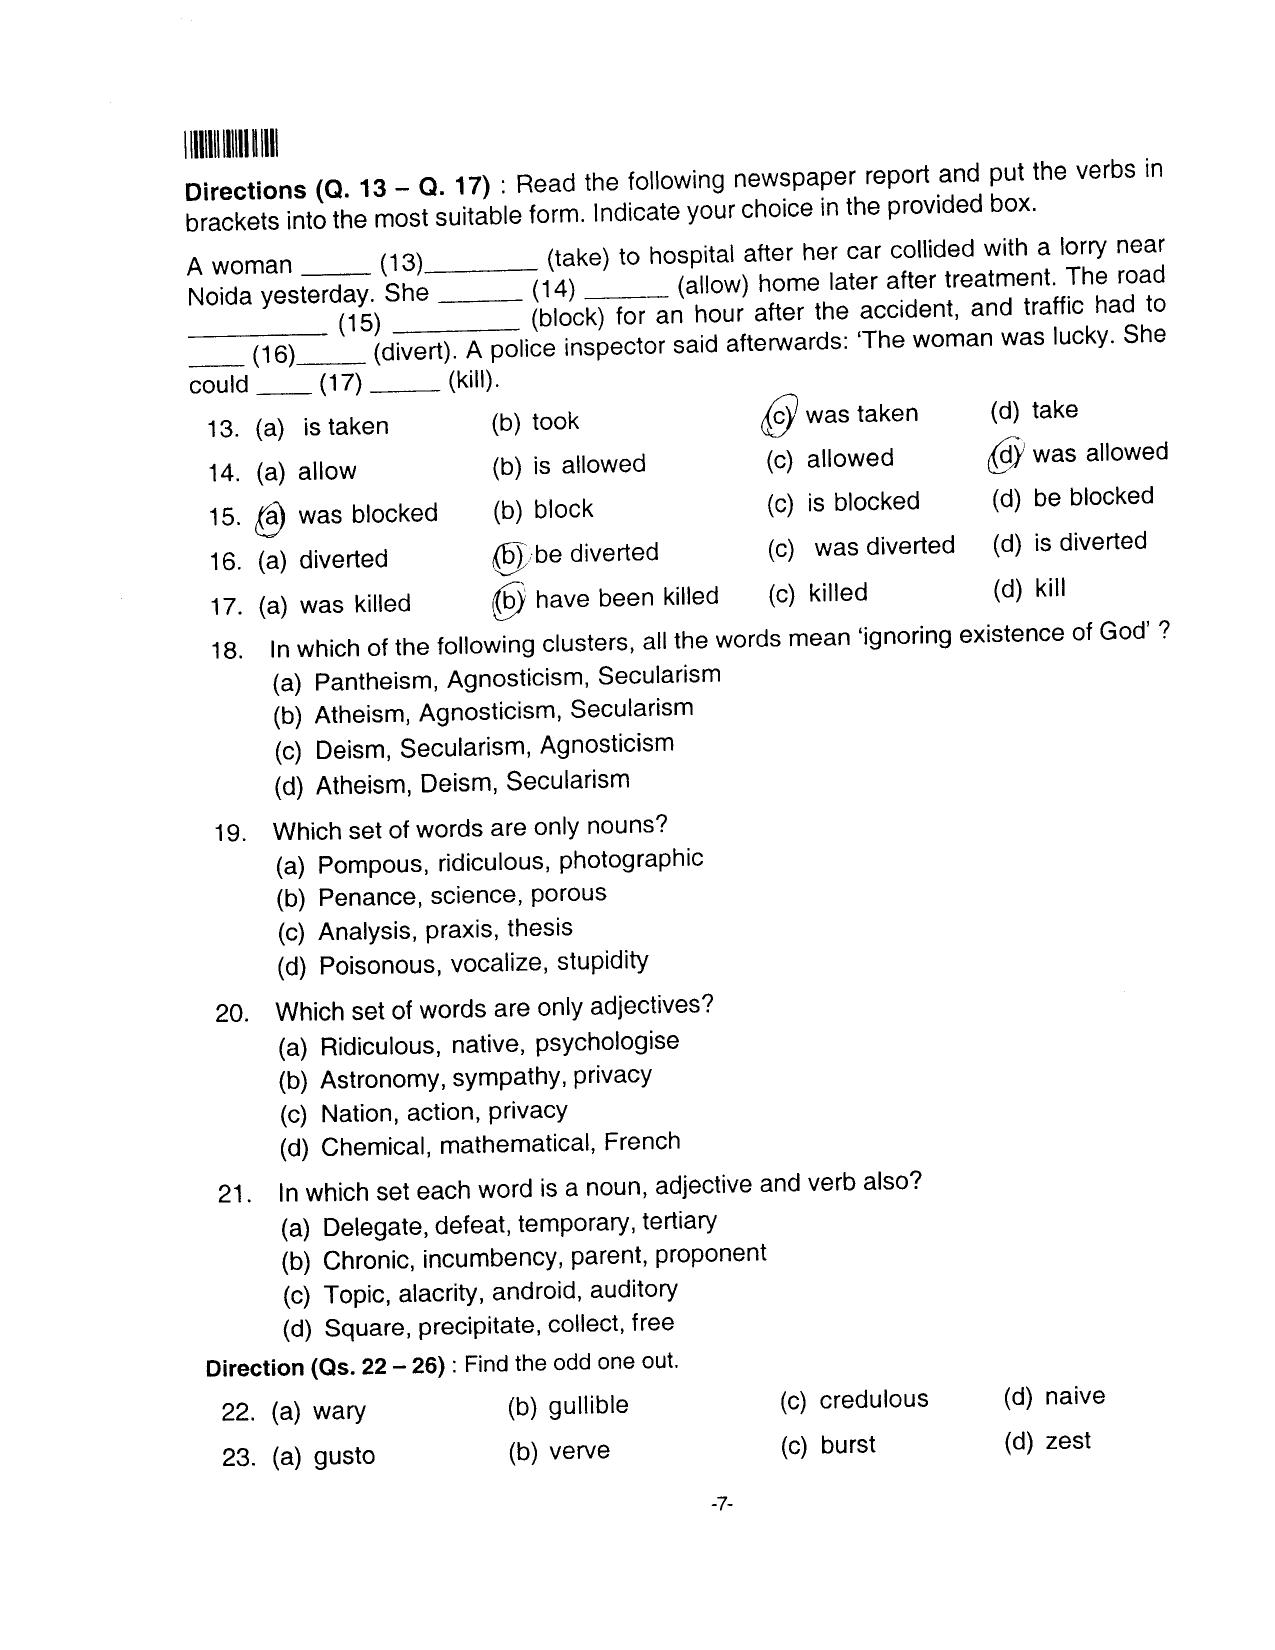 AILET 2016 Question Paper for BA LLB - Page 7